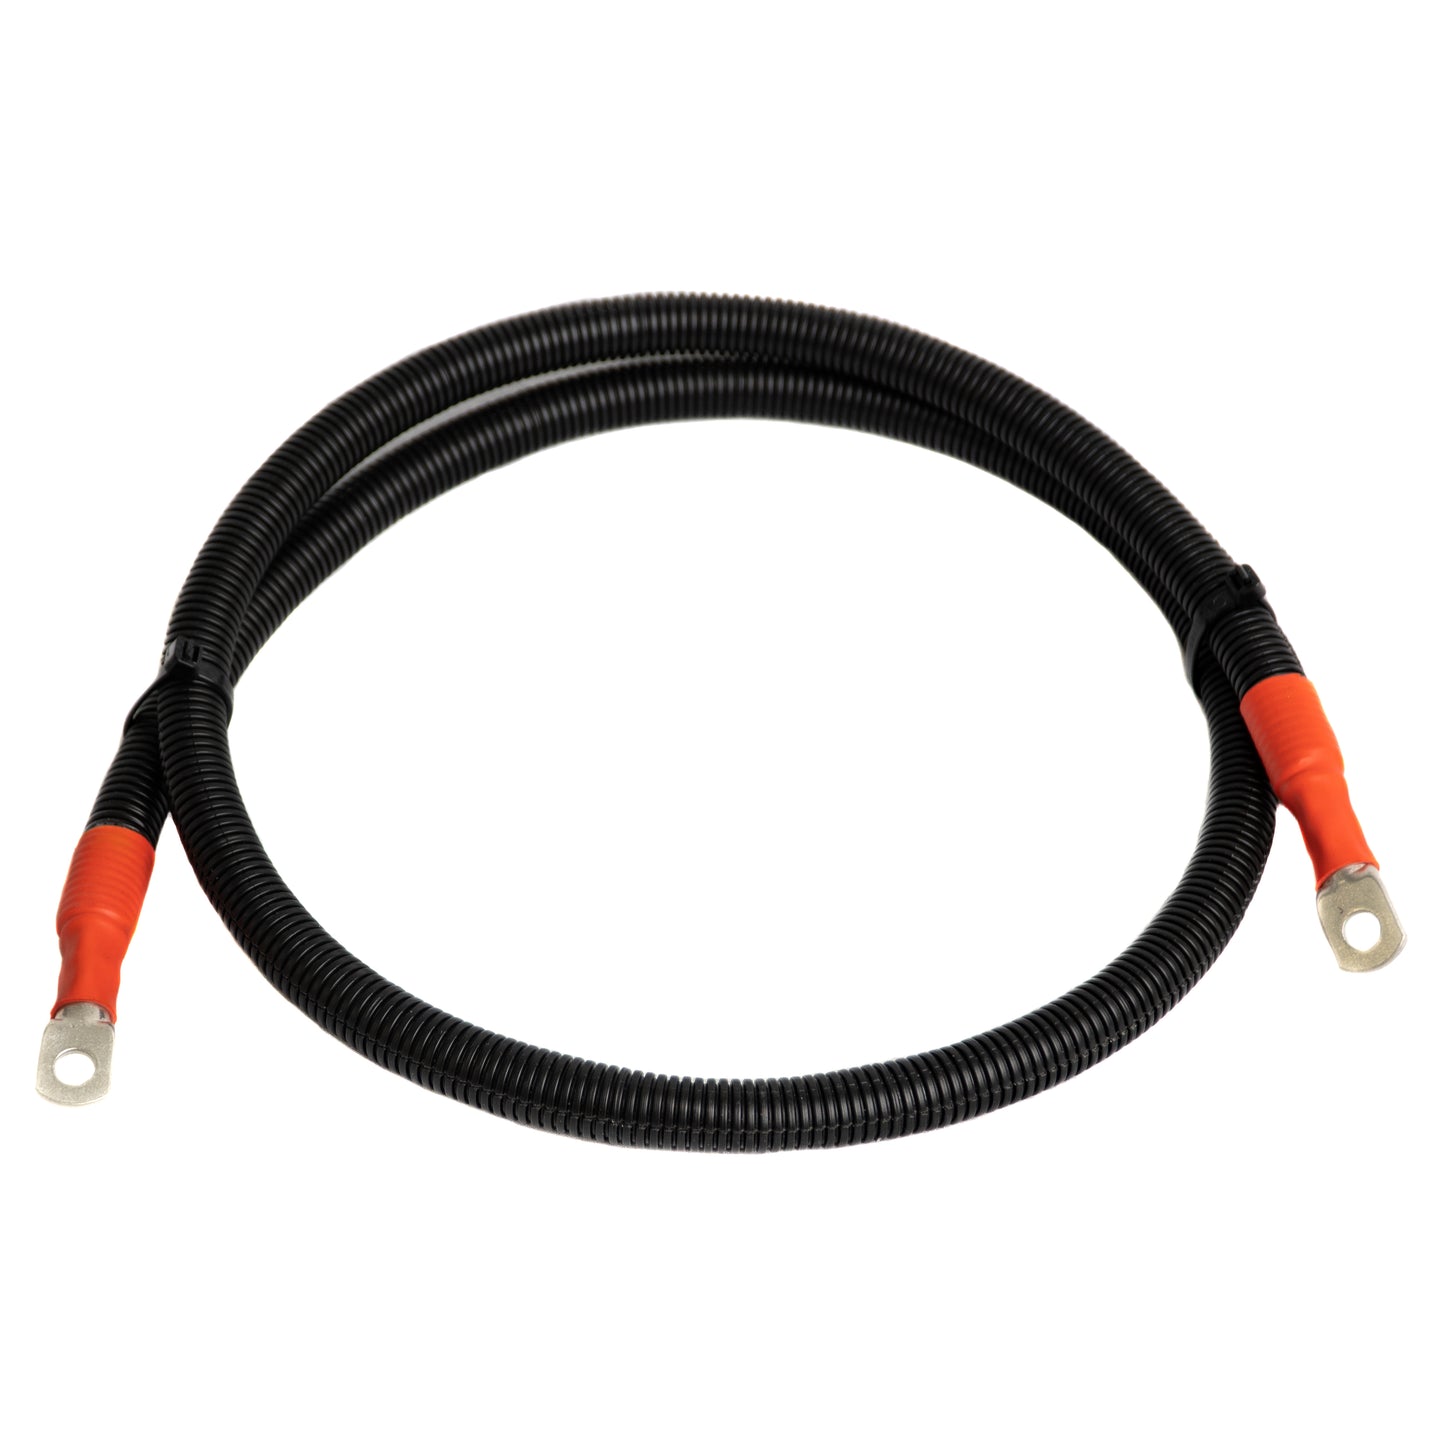 Lithium Dual Battery Cable Kit to suit Prado